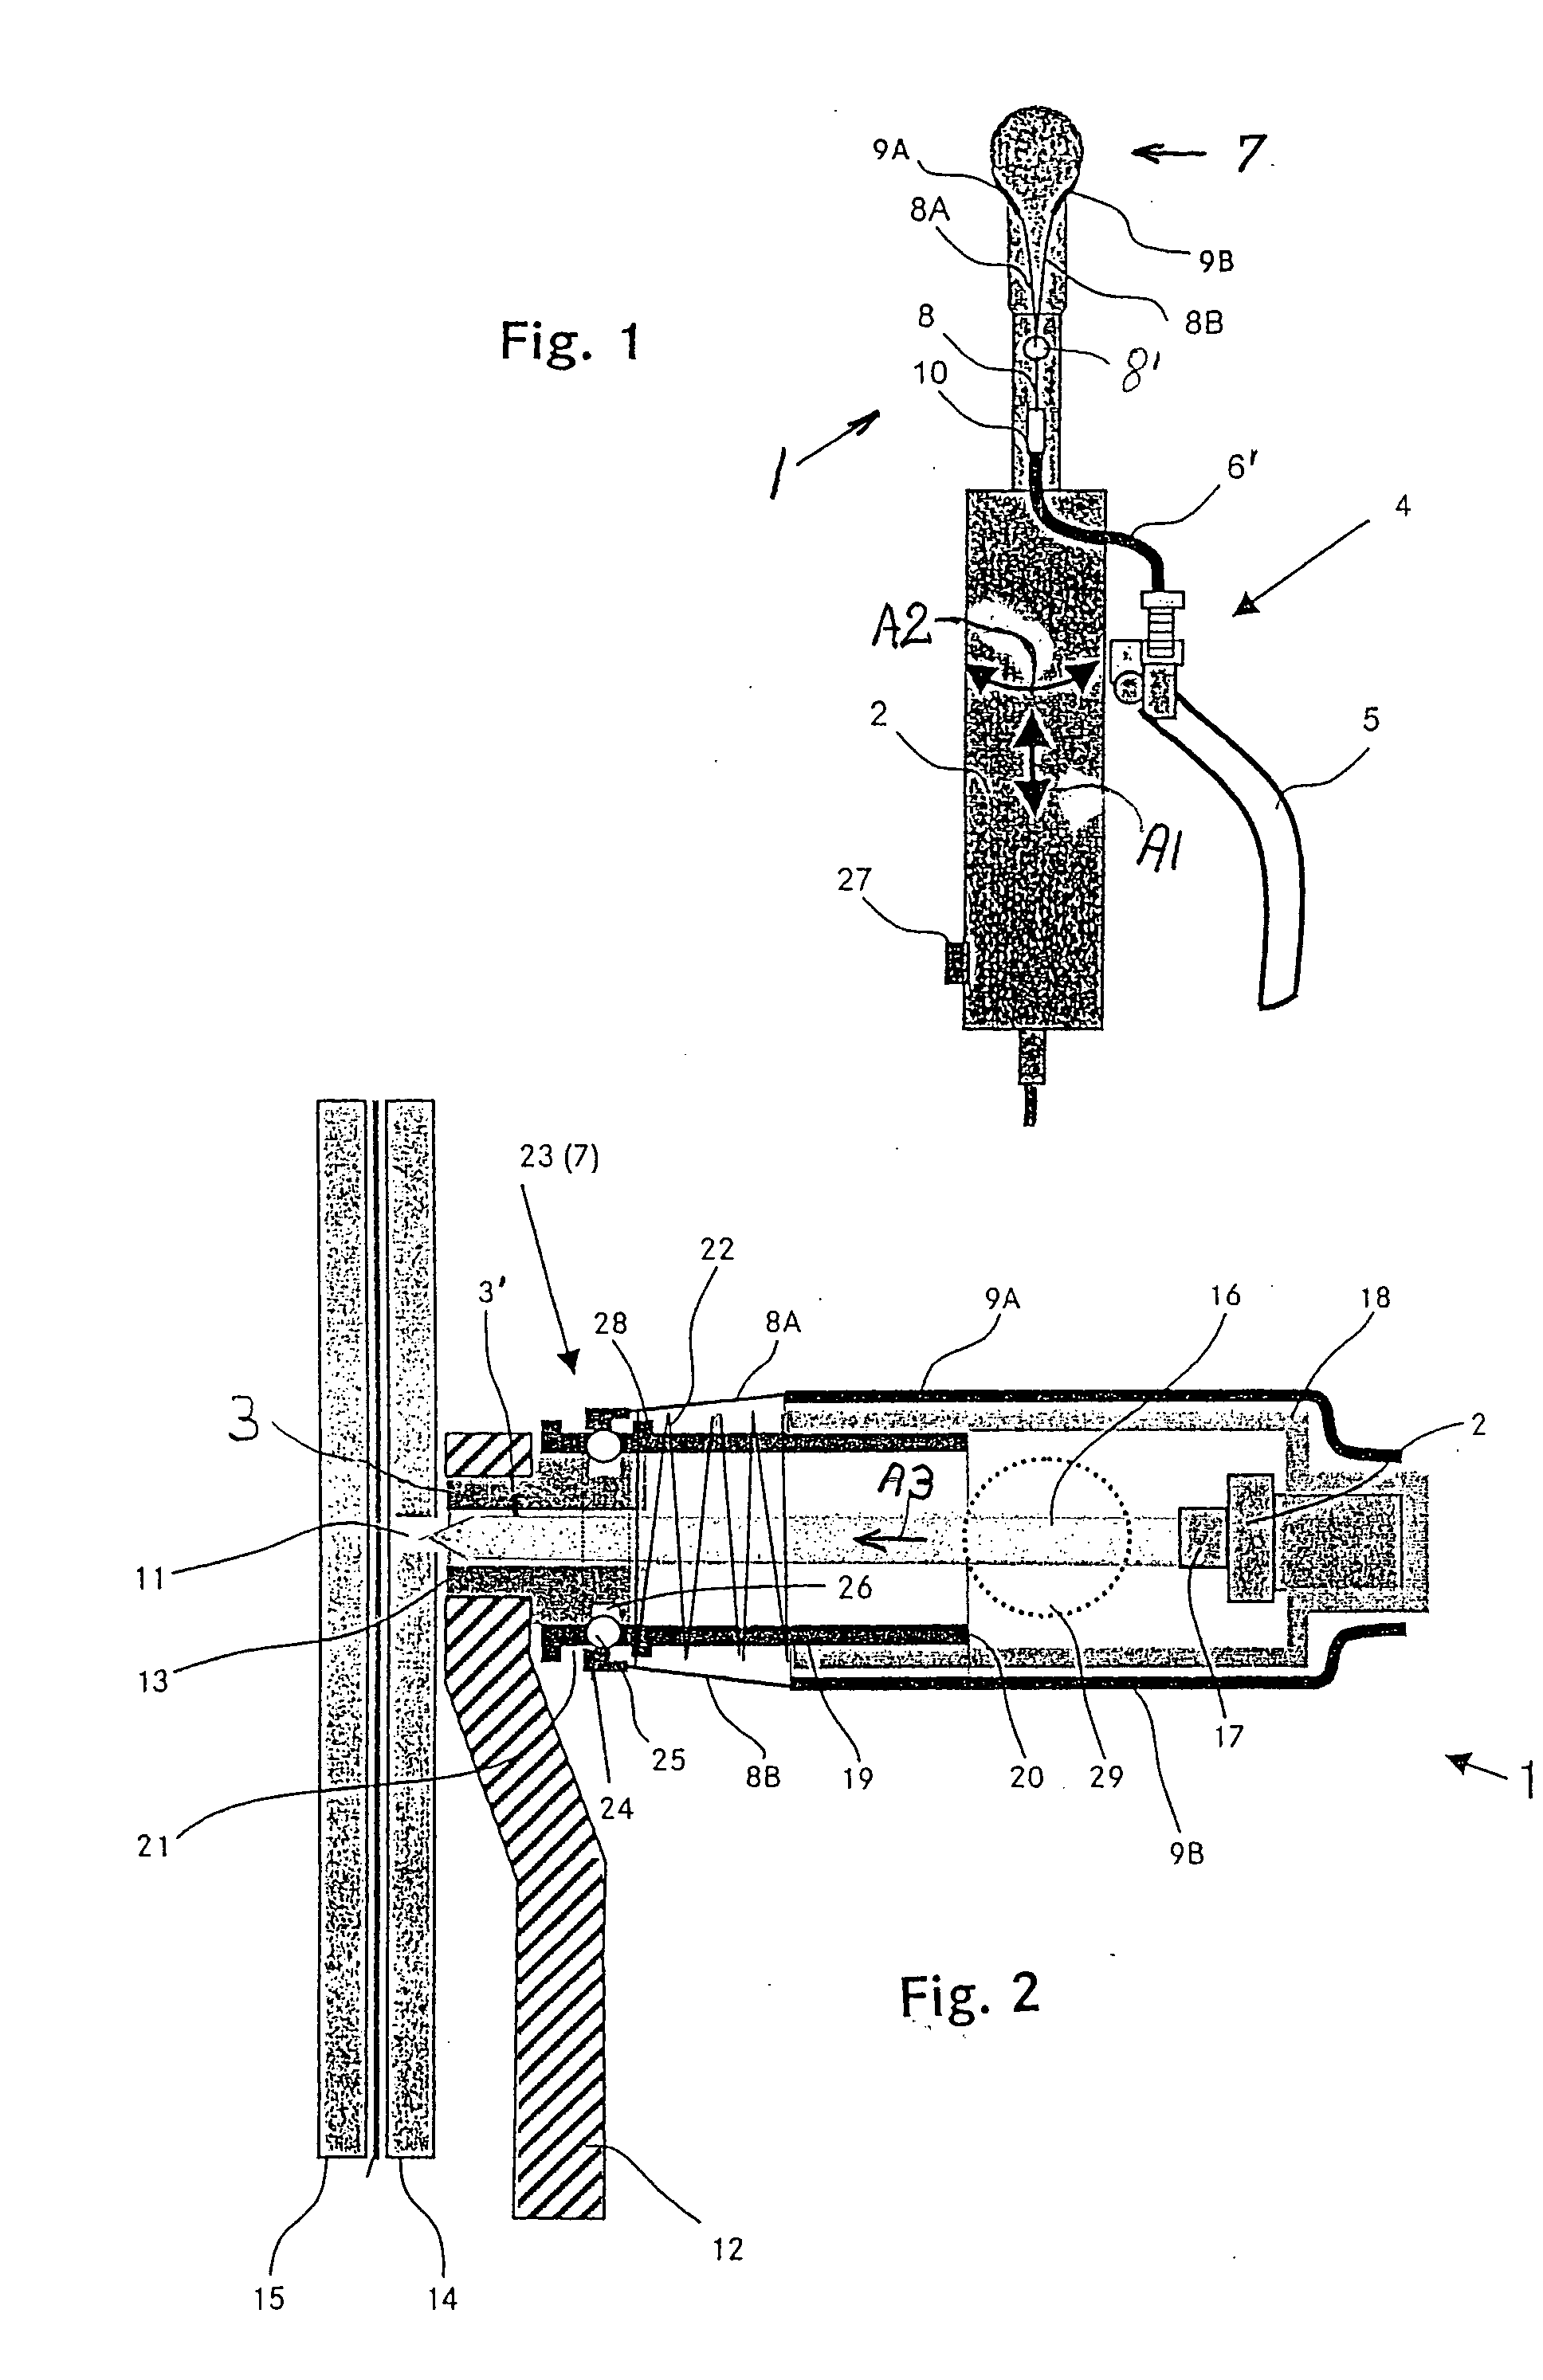 Power drill attachment and method for using the attachment